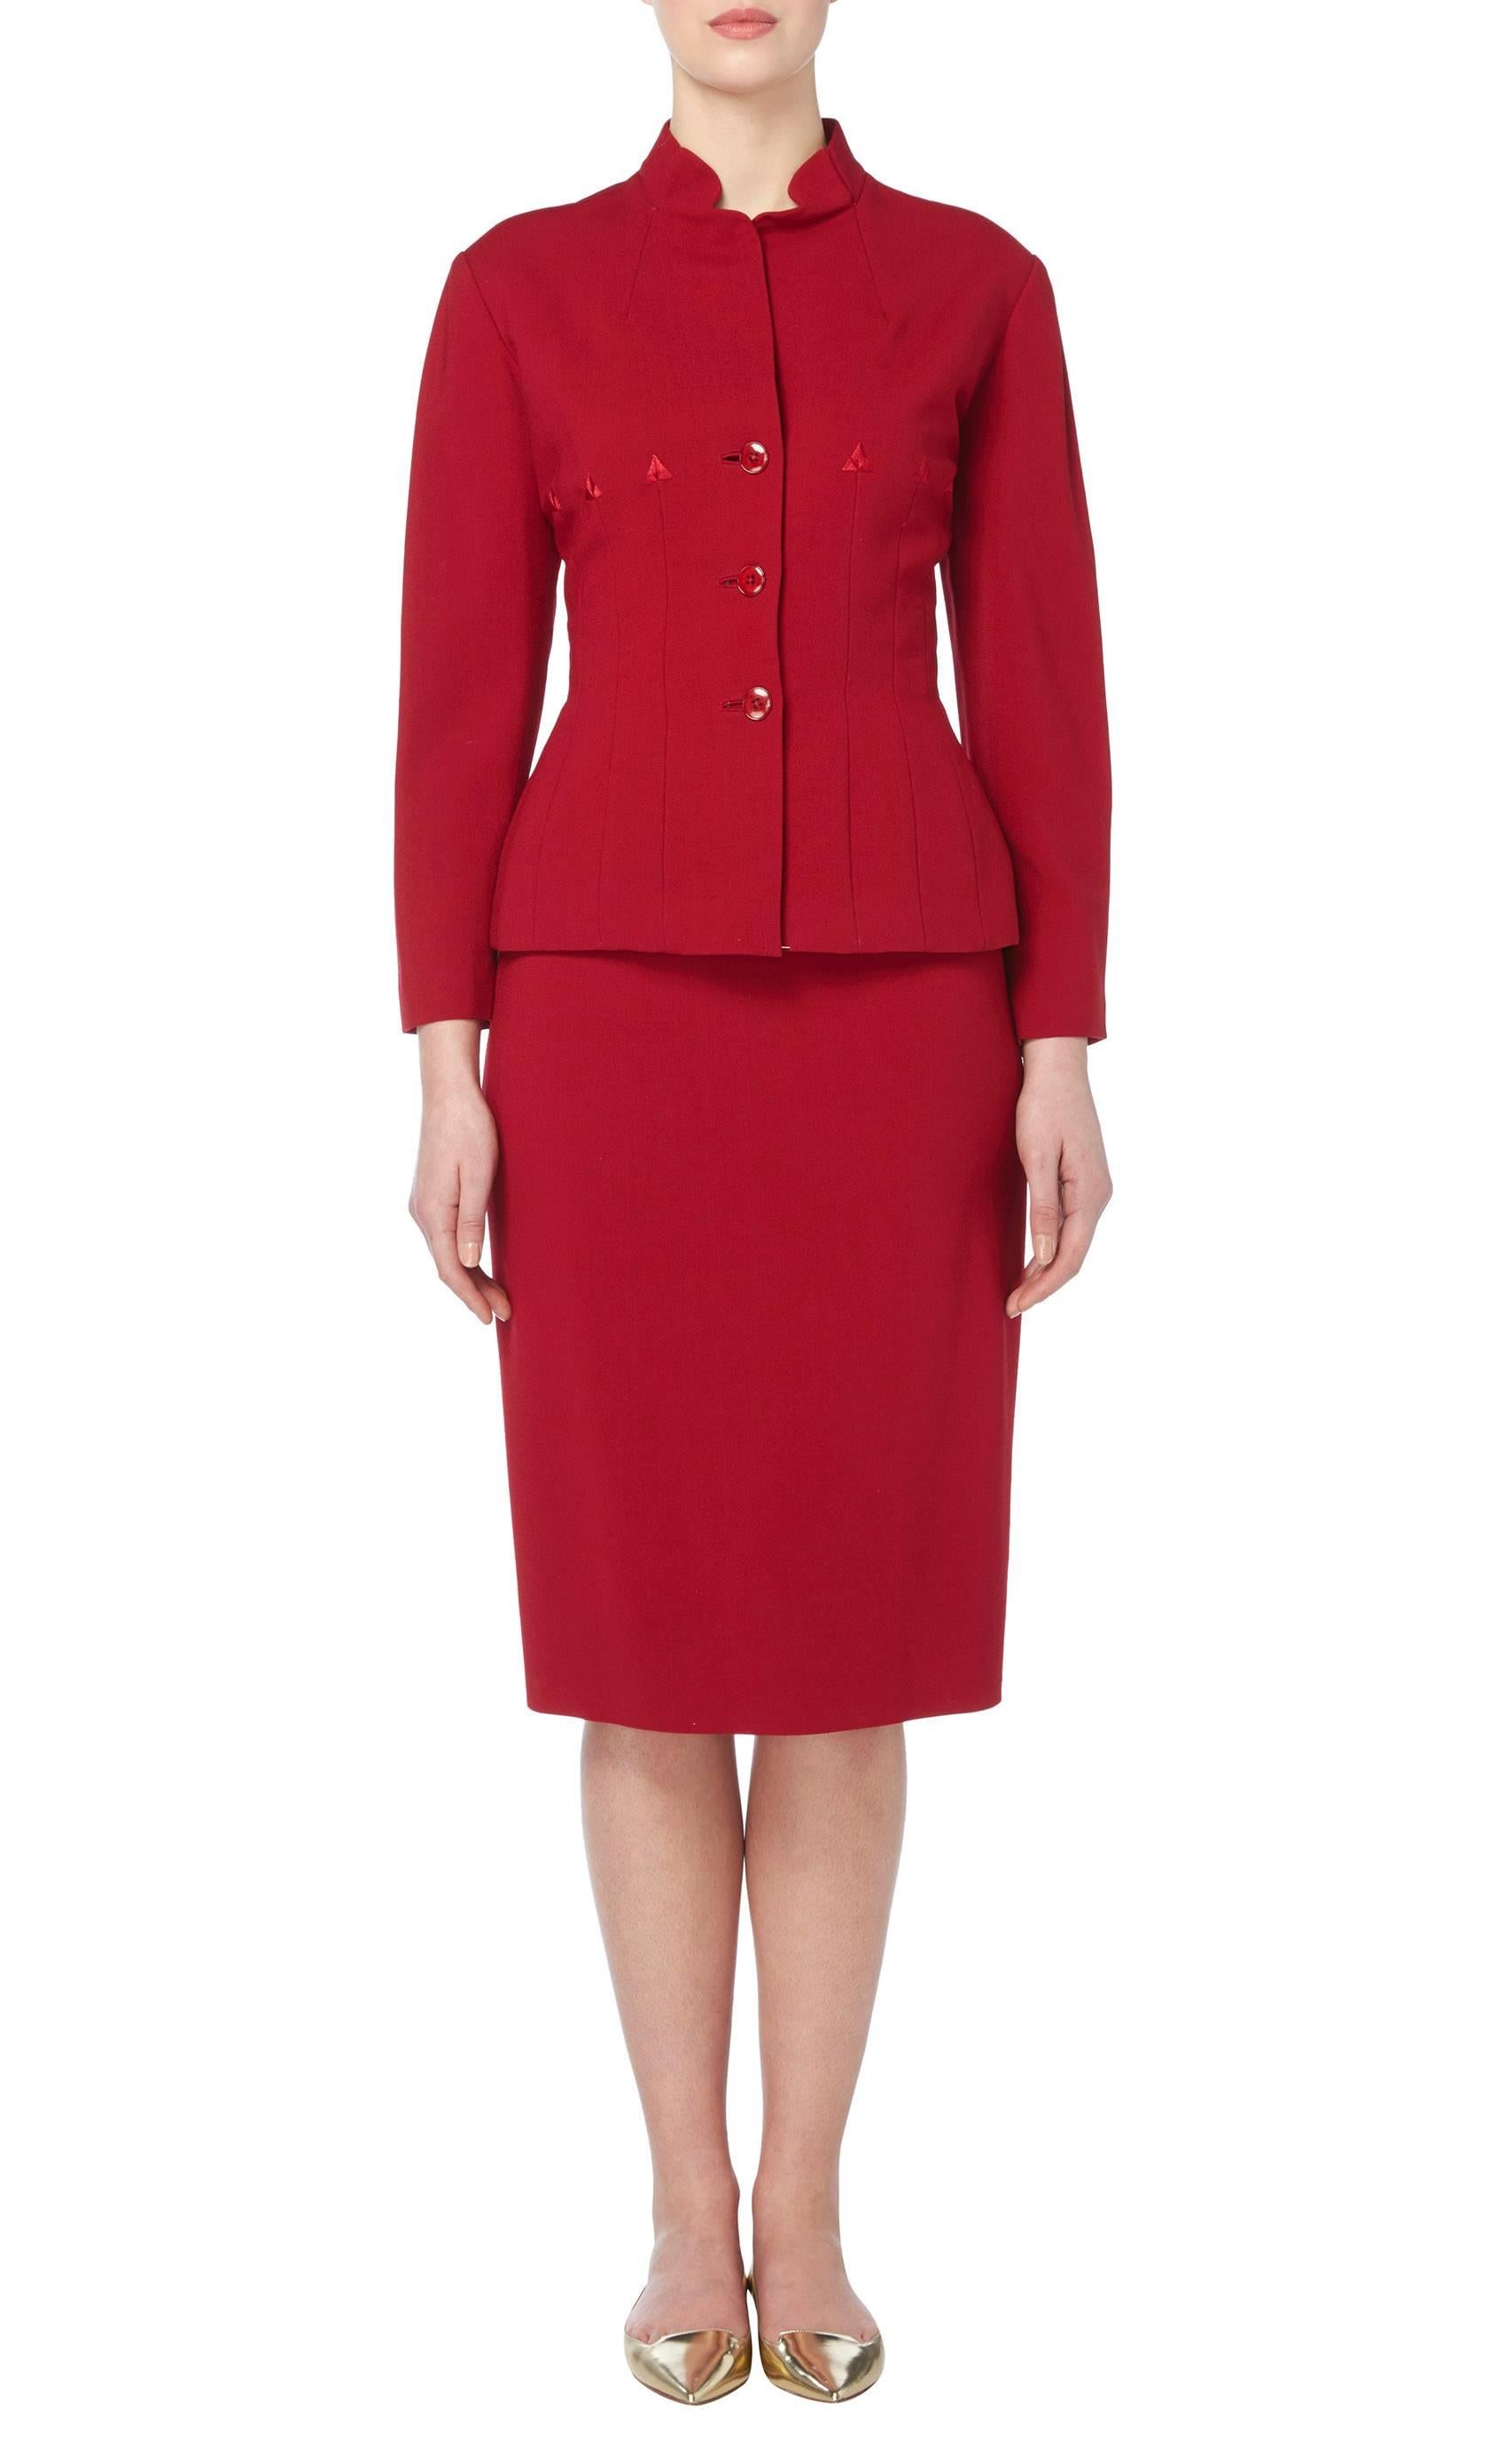 An amazing example of Jacques Fath love of the hourglass silhouette, this beautifully tailored skirt suit will look fabulous in or outside of the boardroom. The shoulder pads, nipped in waist and padded hips of the jacket create a highly flattering